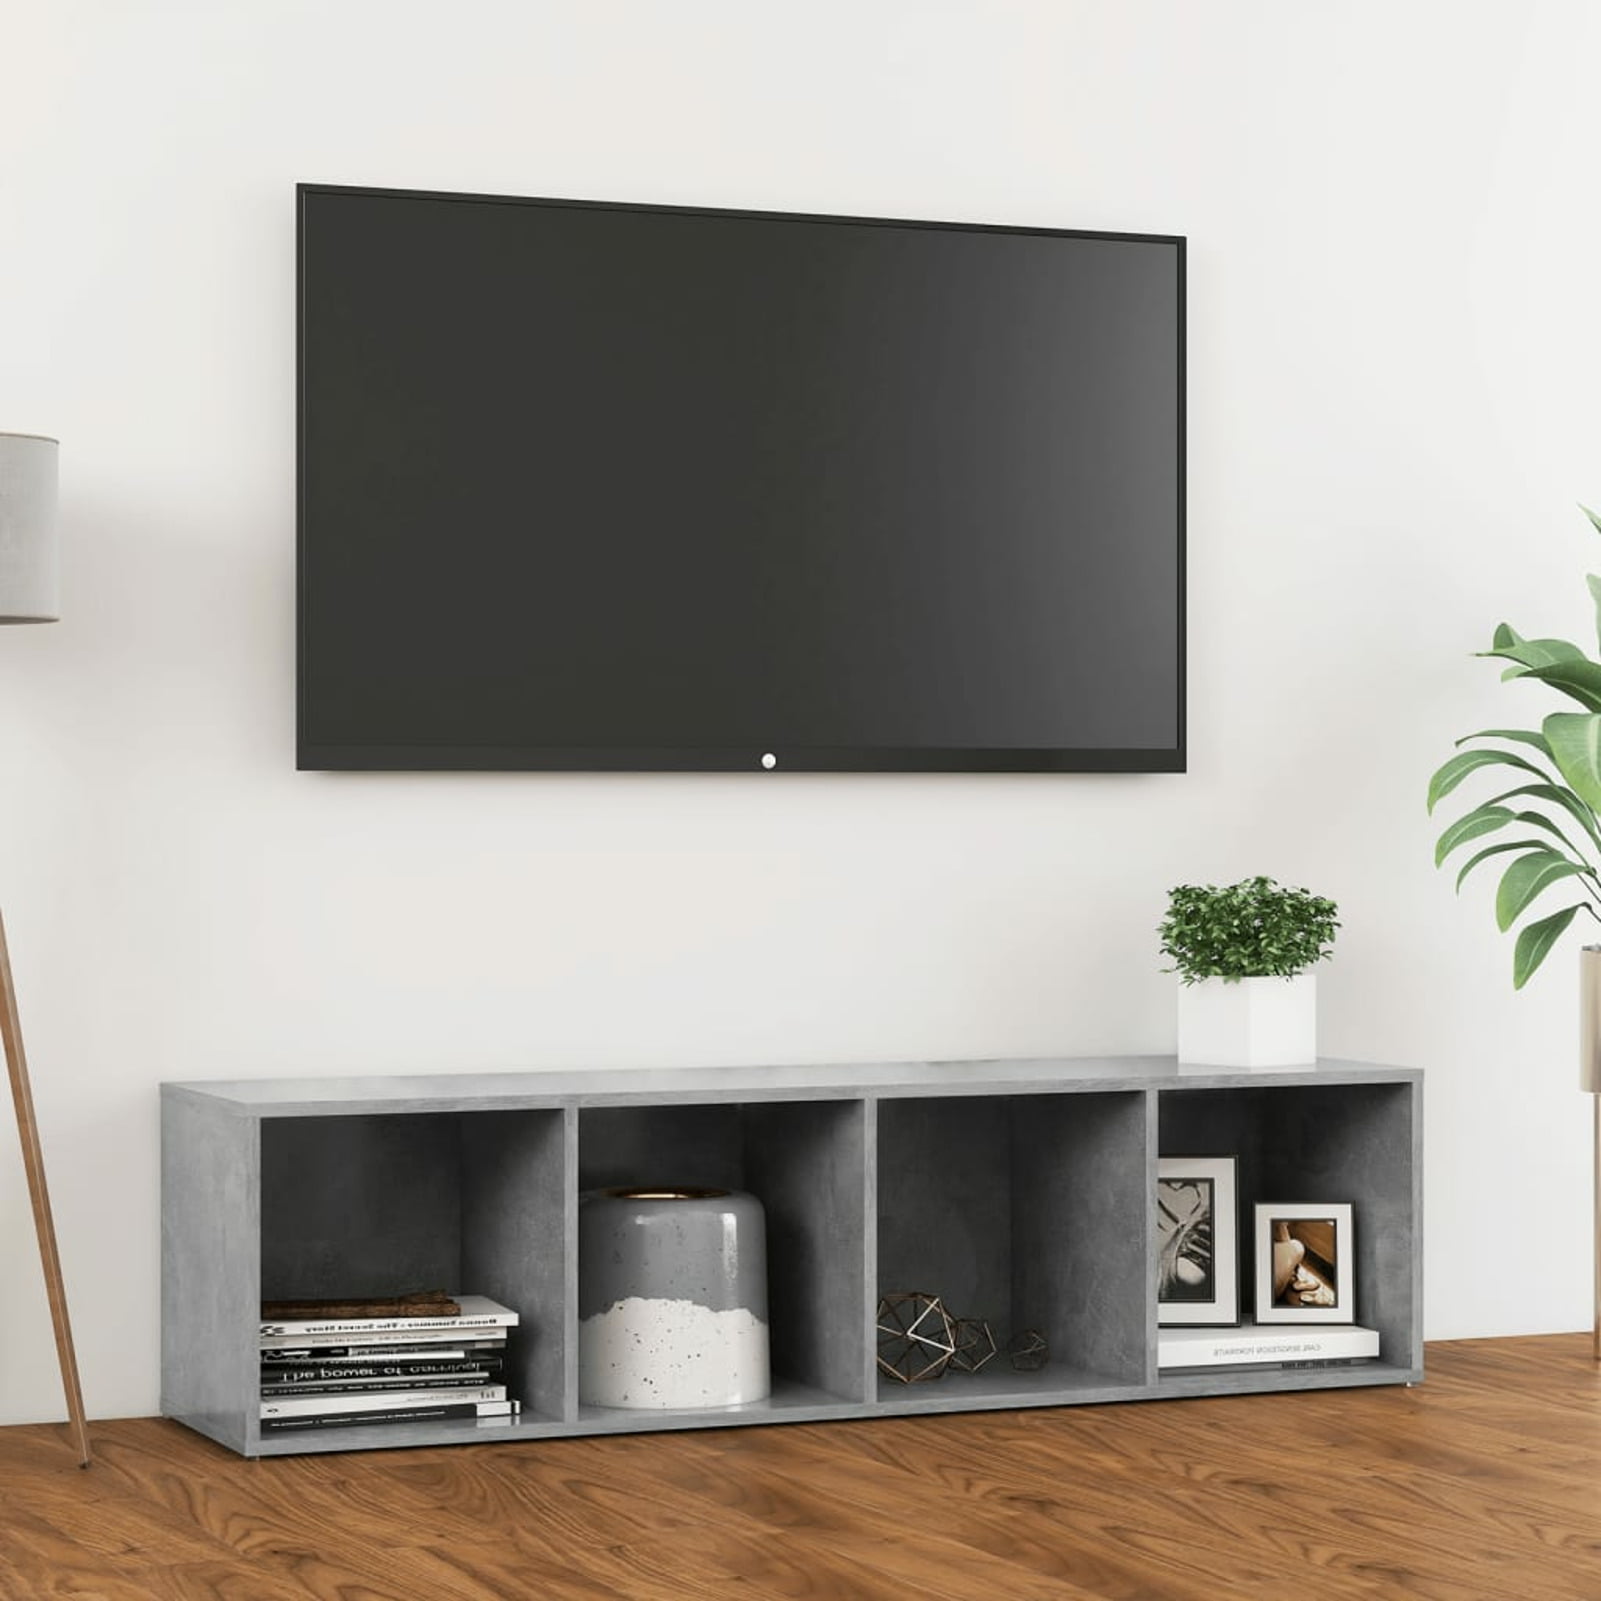 Details about   TAVR Universal Floor TV Stand Base with Swivel Height Adjustable Mount 1-Shelf 